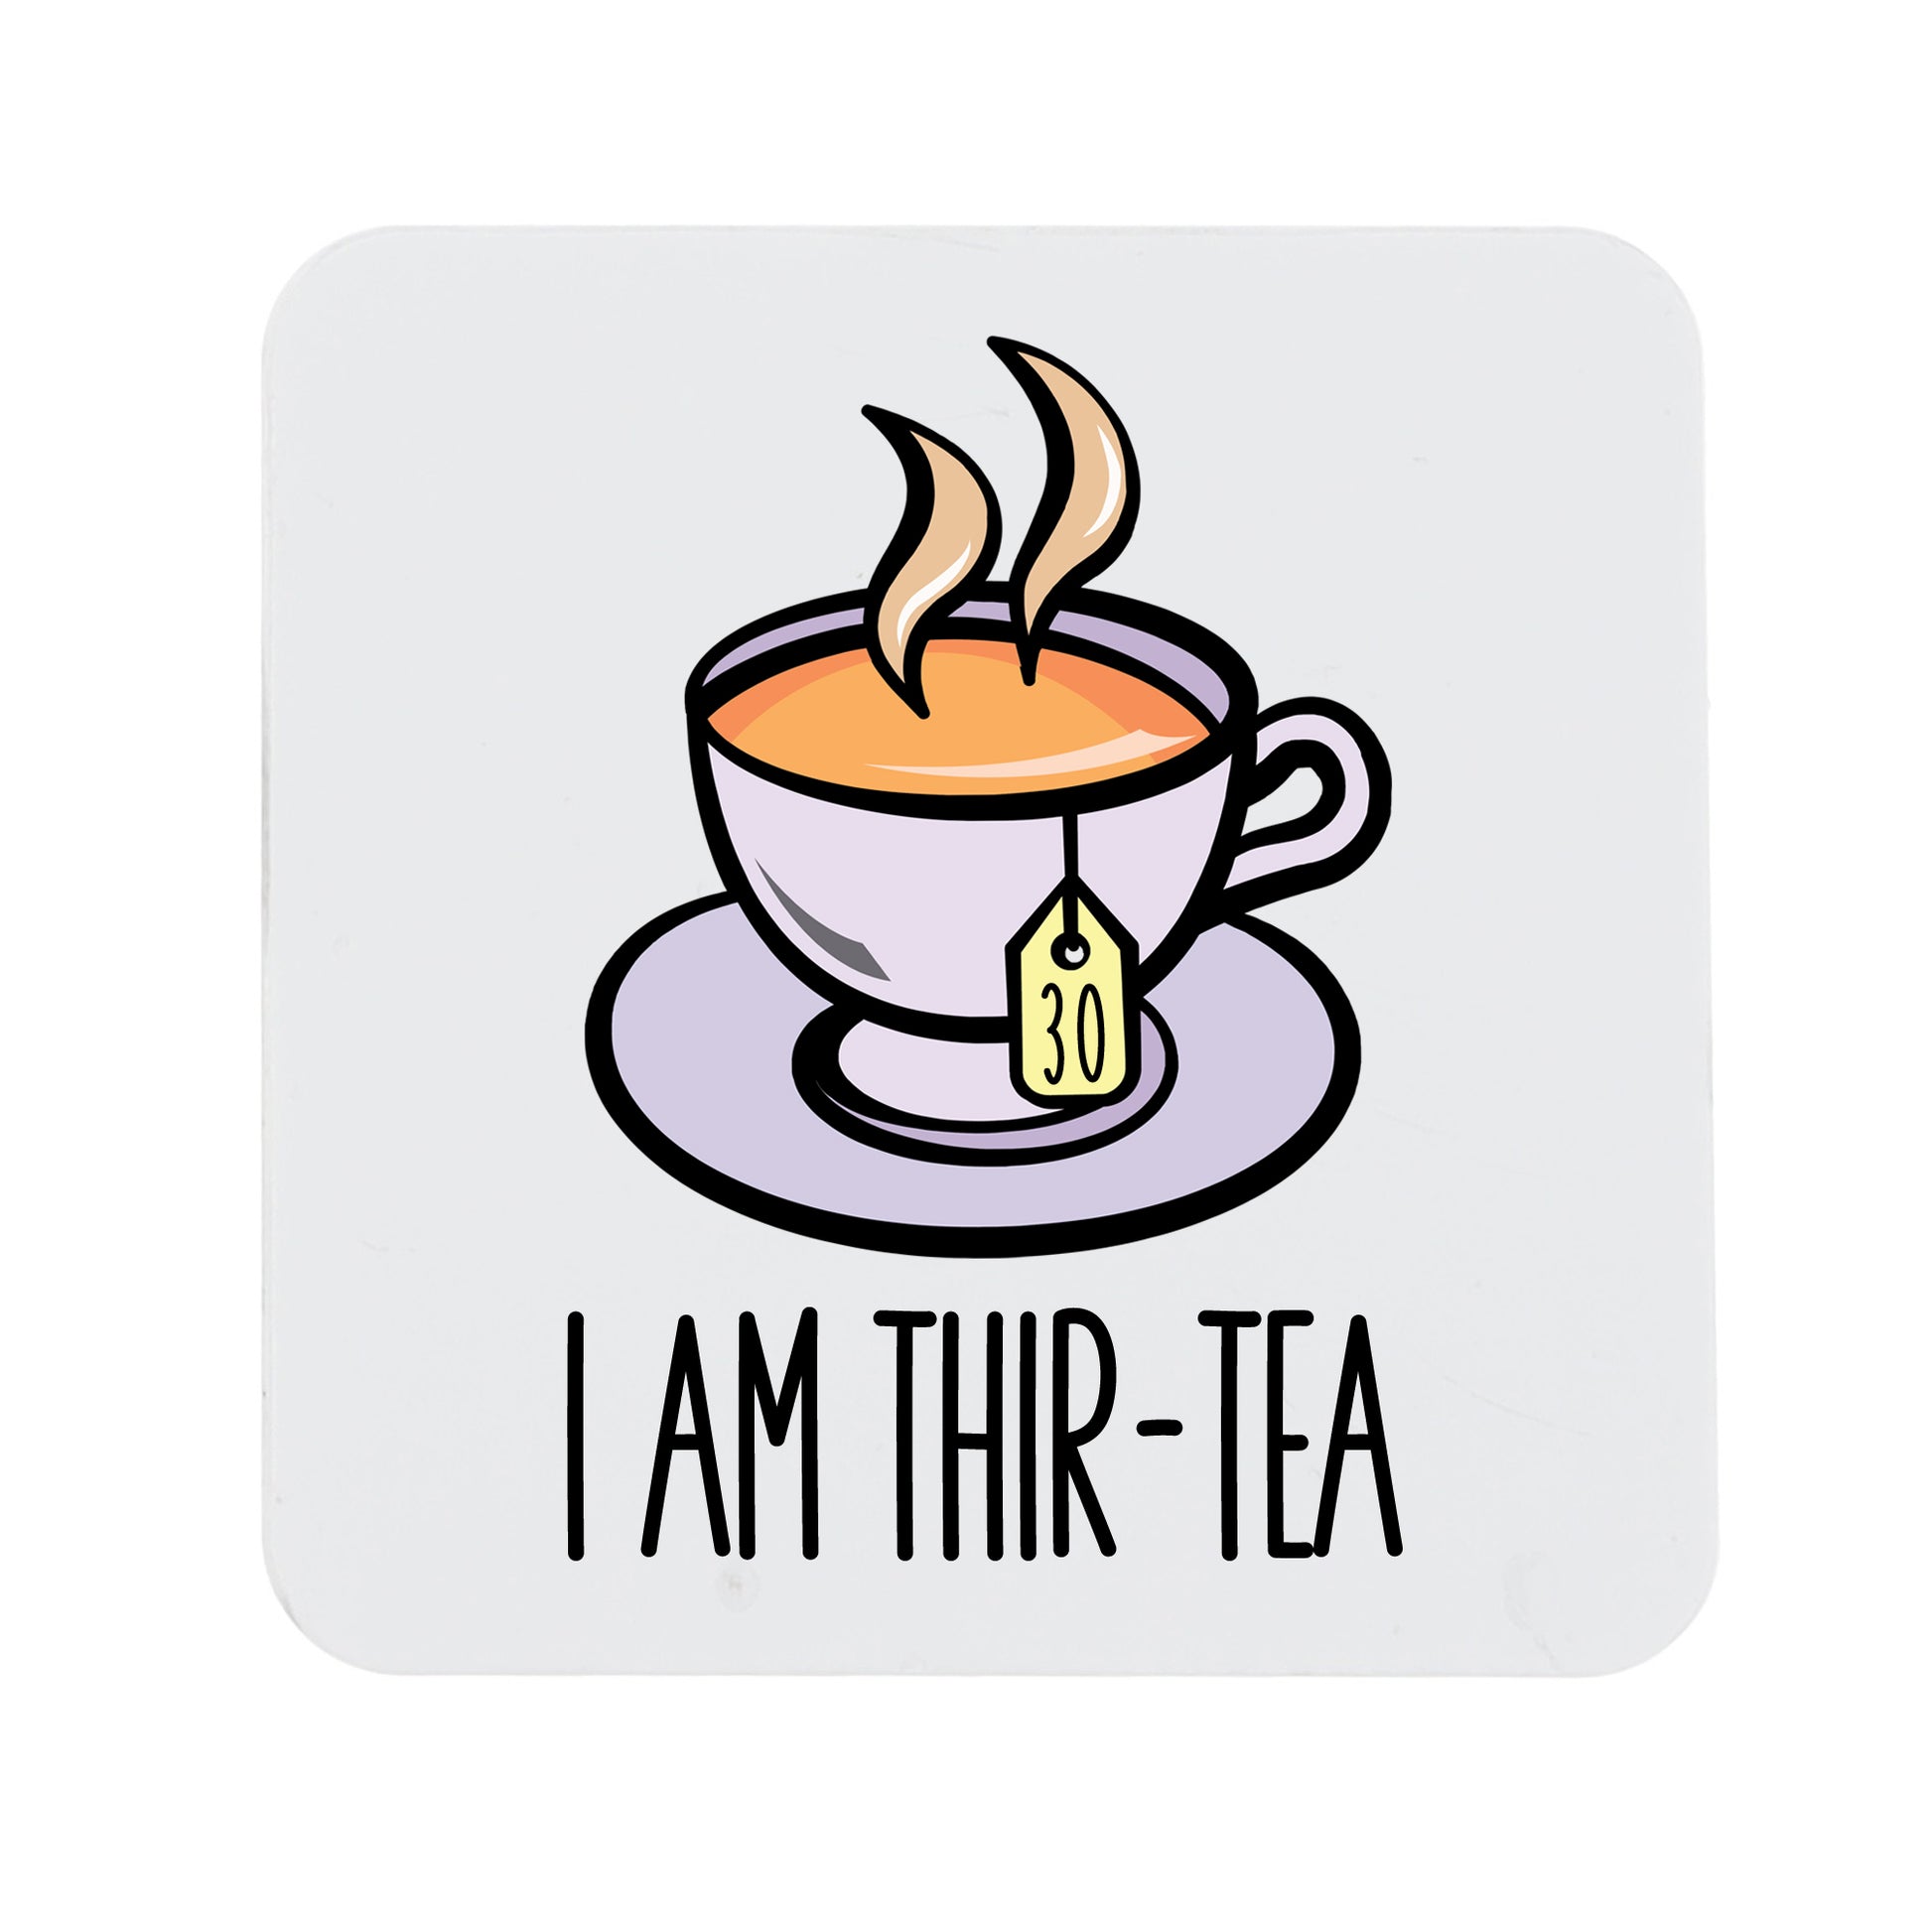 I Am Thir-Tea Funny 30th Birthday Mug Gift for Tea Lovers  - Always Looking Good - Printed Coaster Only  